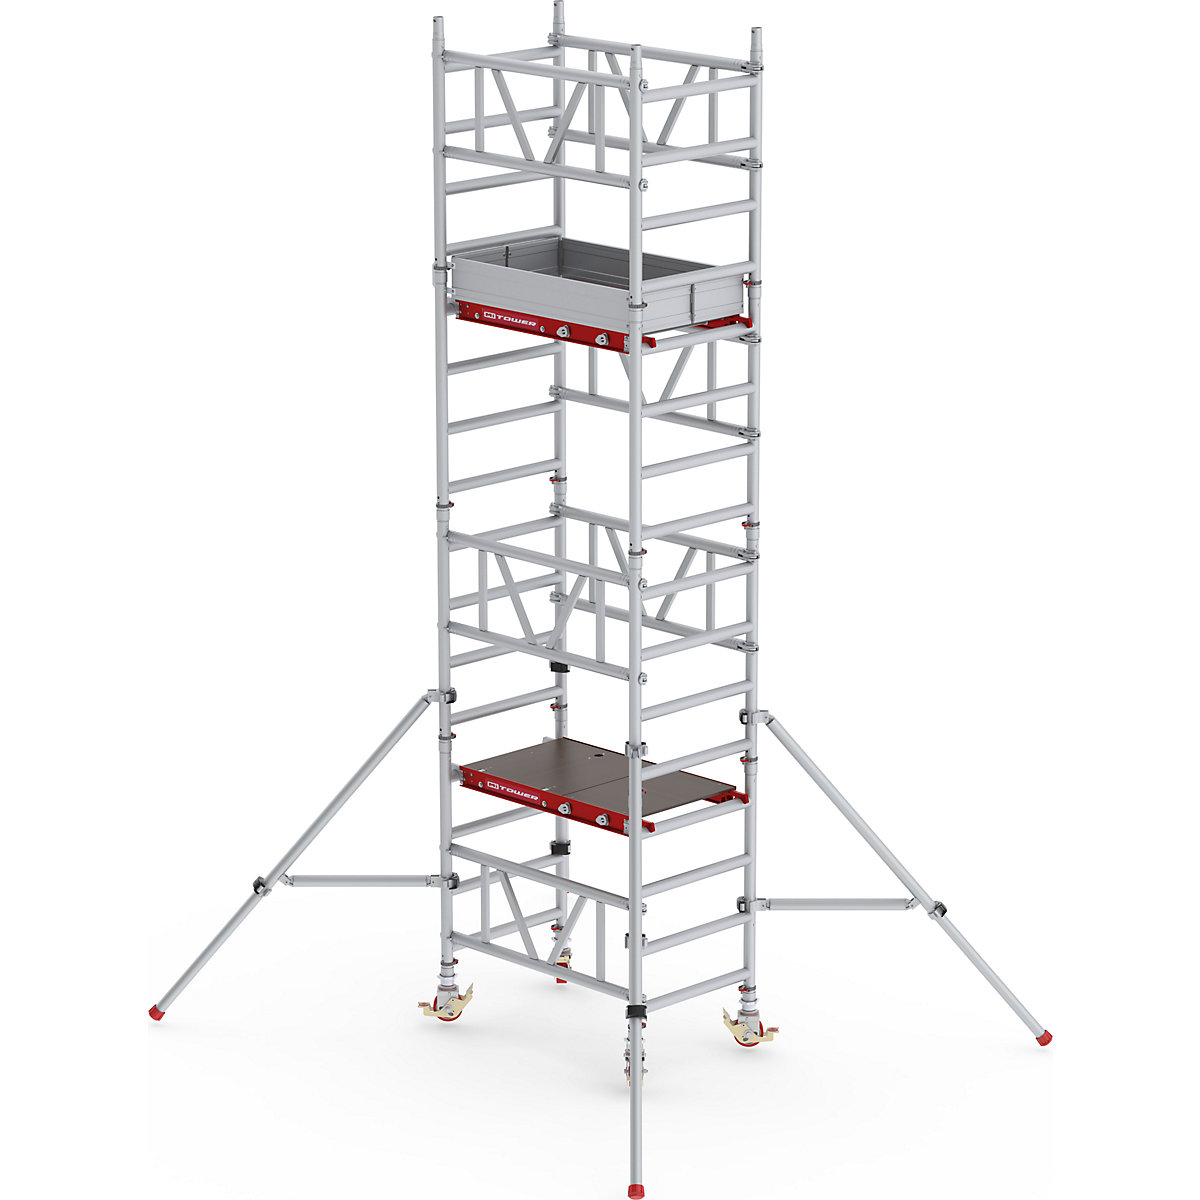 Standard MiTOWER quick assembly mobile access tower – Altrex, wooden platform, LxW 1200 x 750 mm, working height 5 m-23